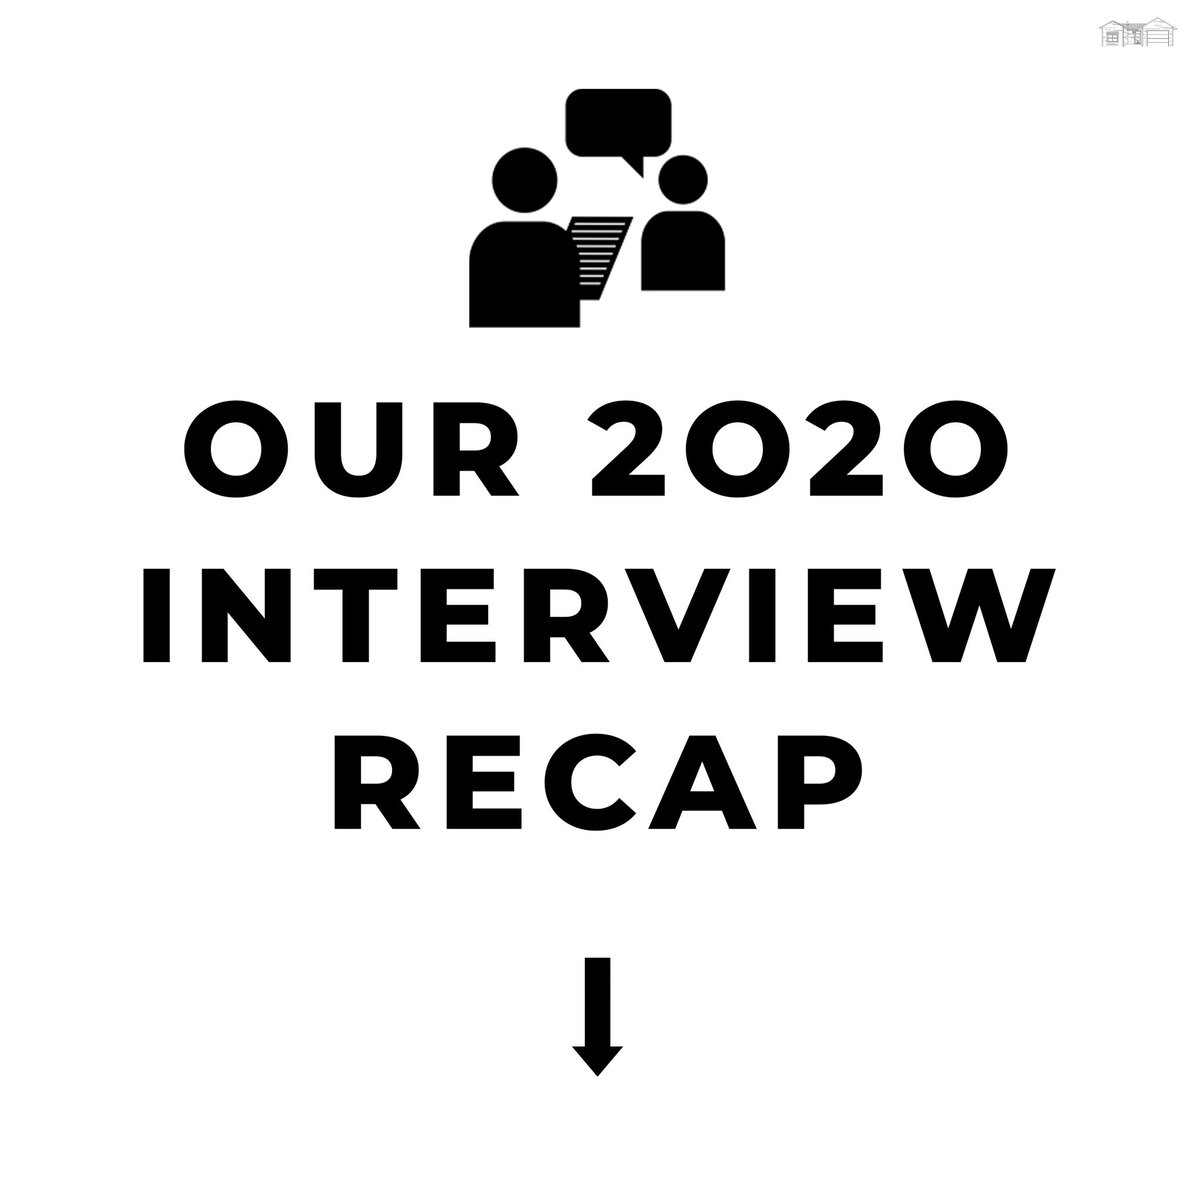 Before we make our big announcement about new interviews next week, we decided to take this Thursday to reflect on our best interviews from 2020.Scroll through the thread below to learn more about the talented creatives we have had the privilege of covering: